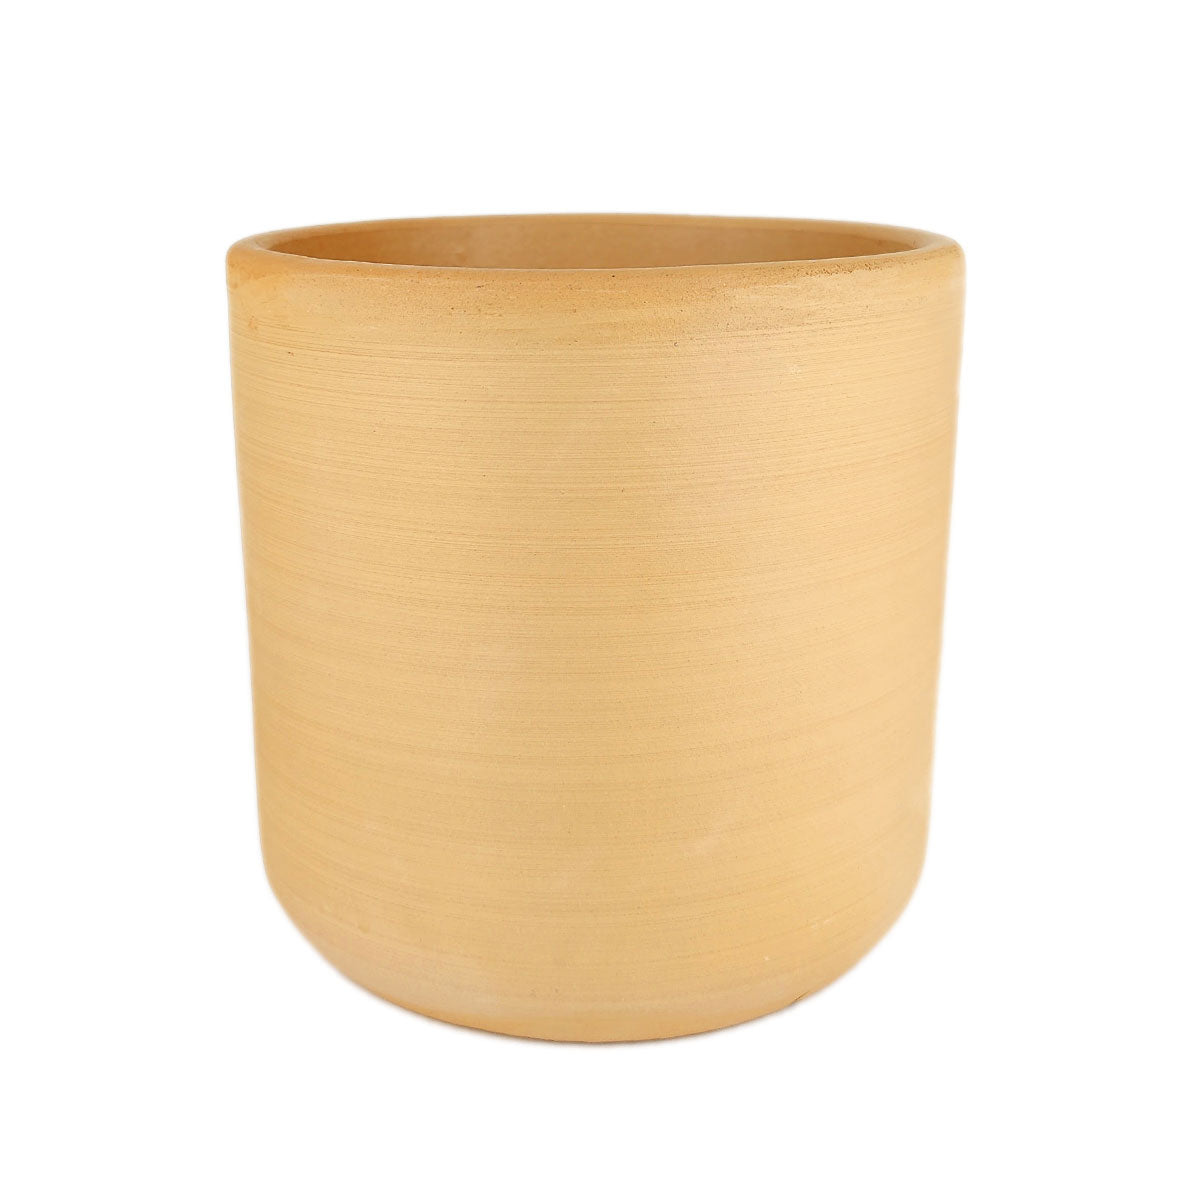 Terracotta deep cylinder pot, clay pot with drainage hole, 6 inch pot for houseplants, breathable pot for plants